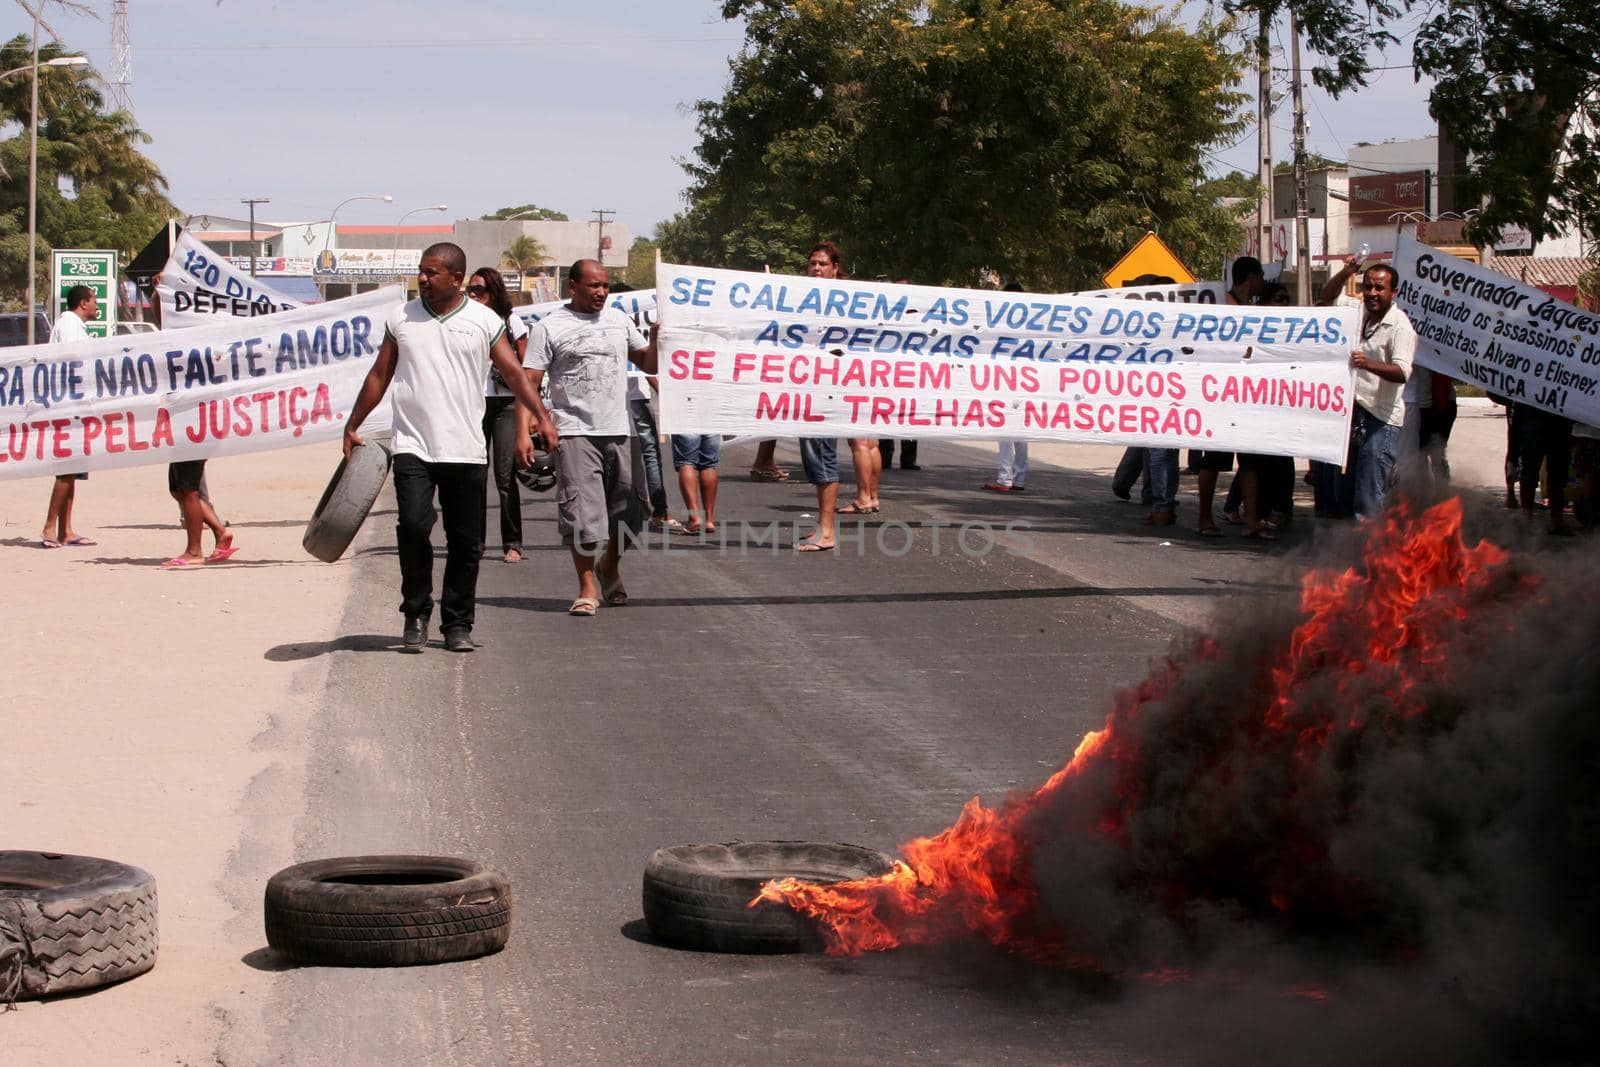 highway protest in southern bahia by joasouza